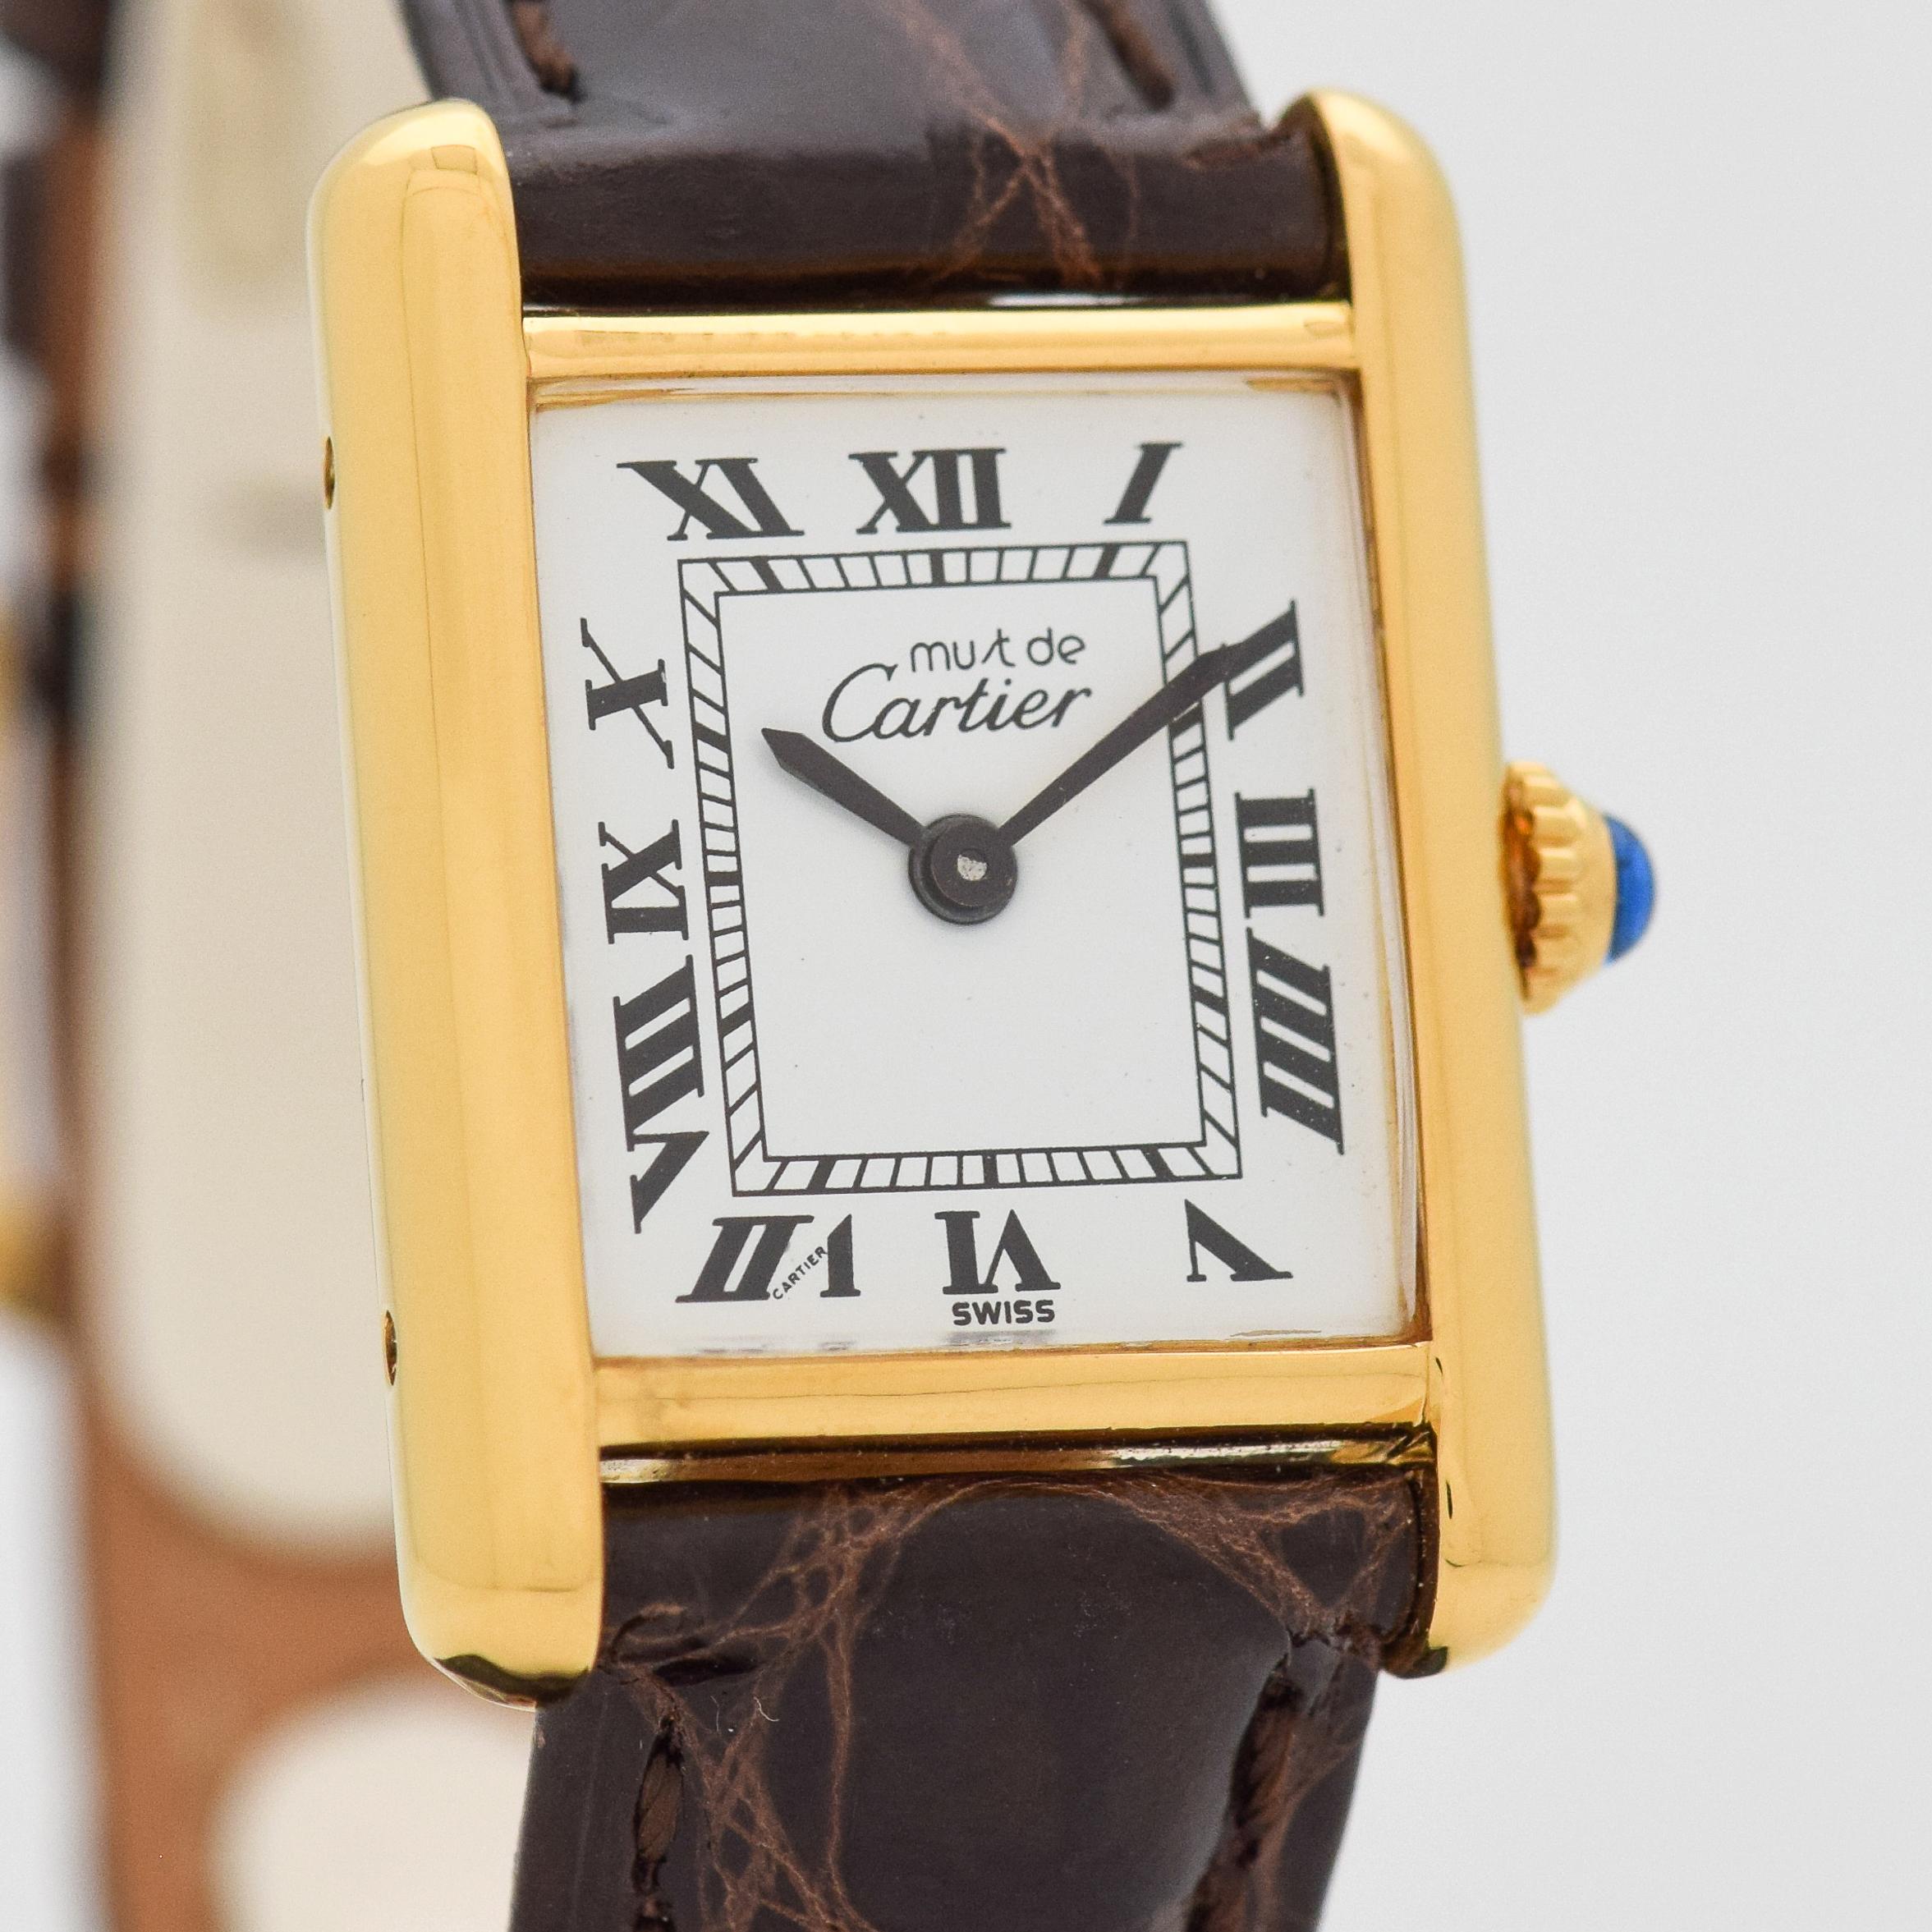 1990's era Cartier Tank Must de Ladies Sized watch. 18K Yellow Gold plated over Sterling Silver. 20mm wide. Powered by a 17-jewel, manual caliber ETA movement. Equipped with a Glossy, Dark Chocolate-colored Crocodile watch strap. Triple Signed.